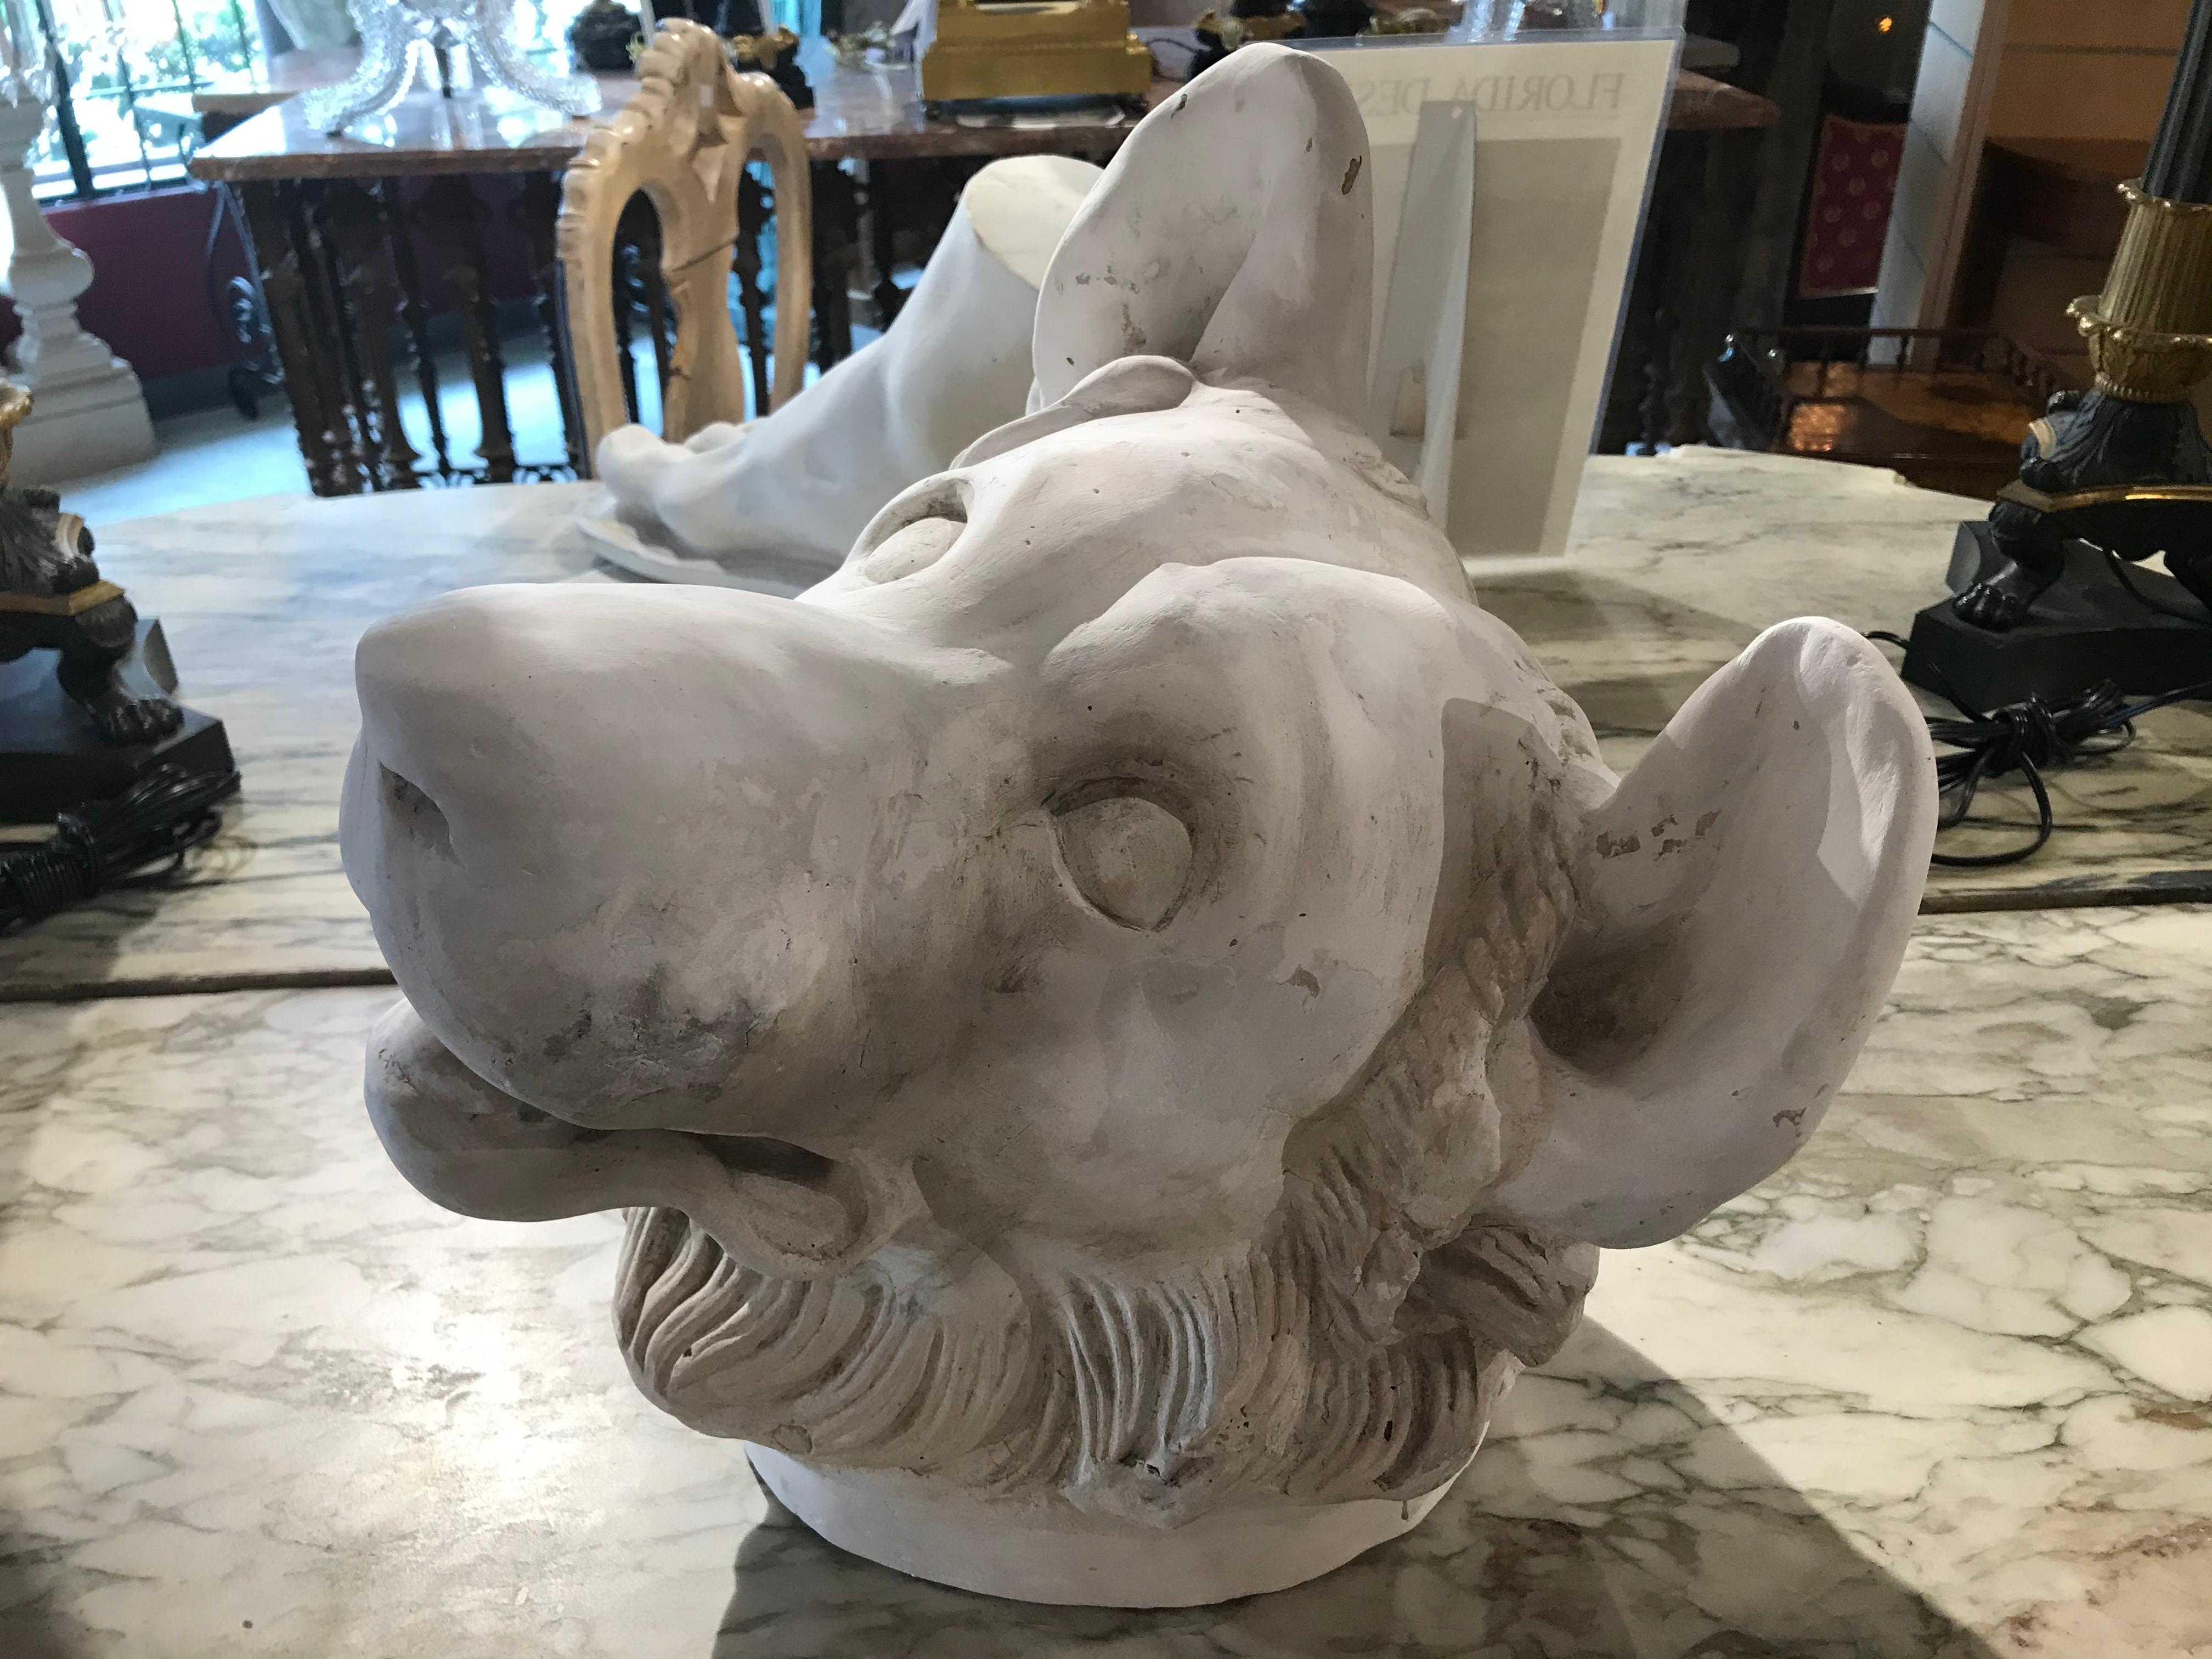 Fiberglass and plaster head of bear, early 20th century

Dimensions:
H 16